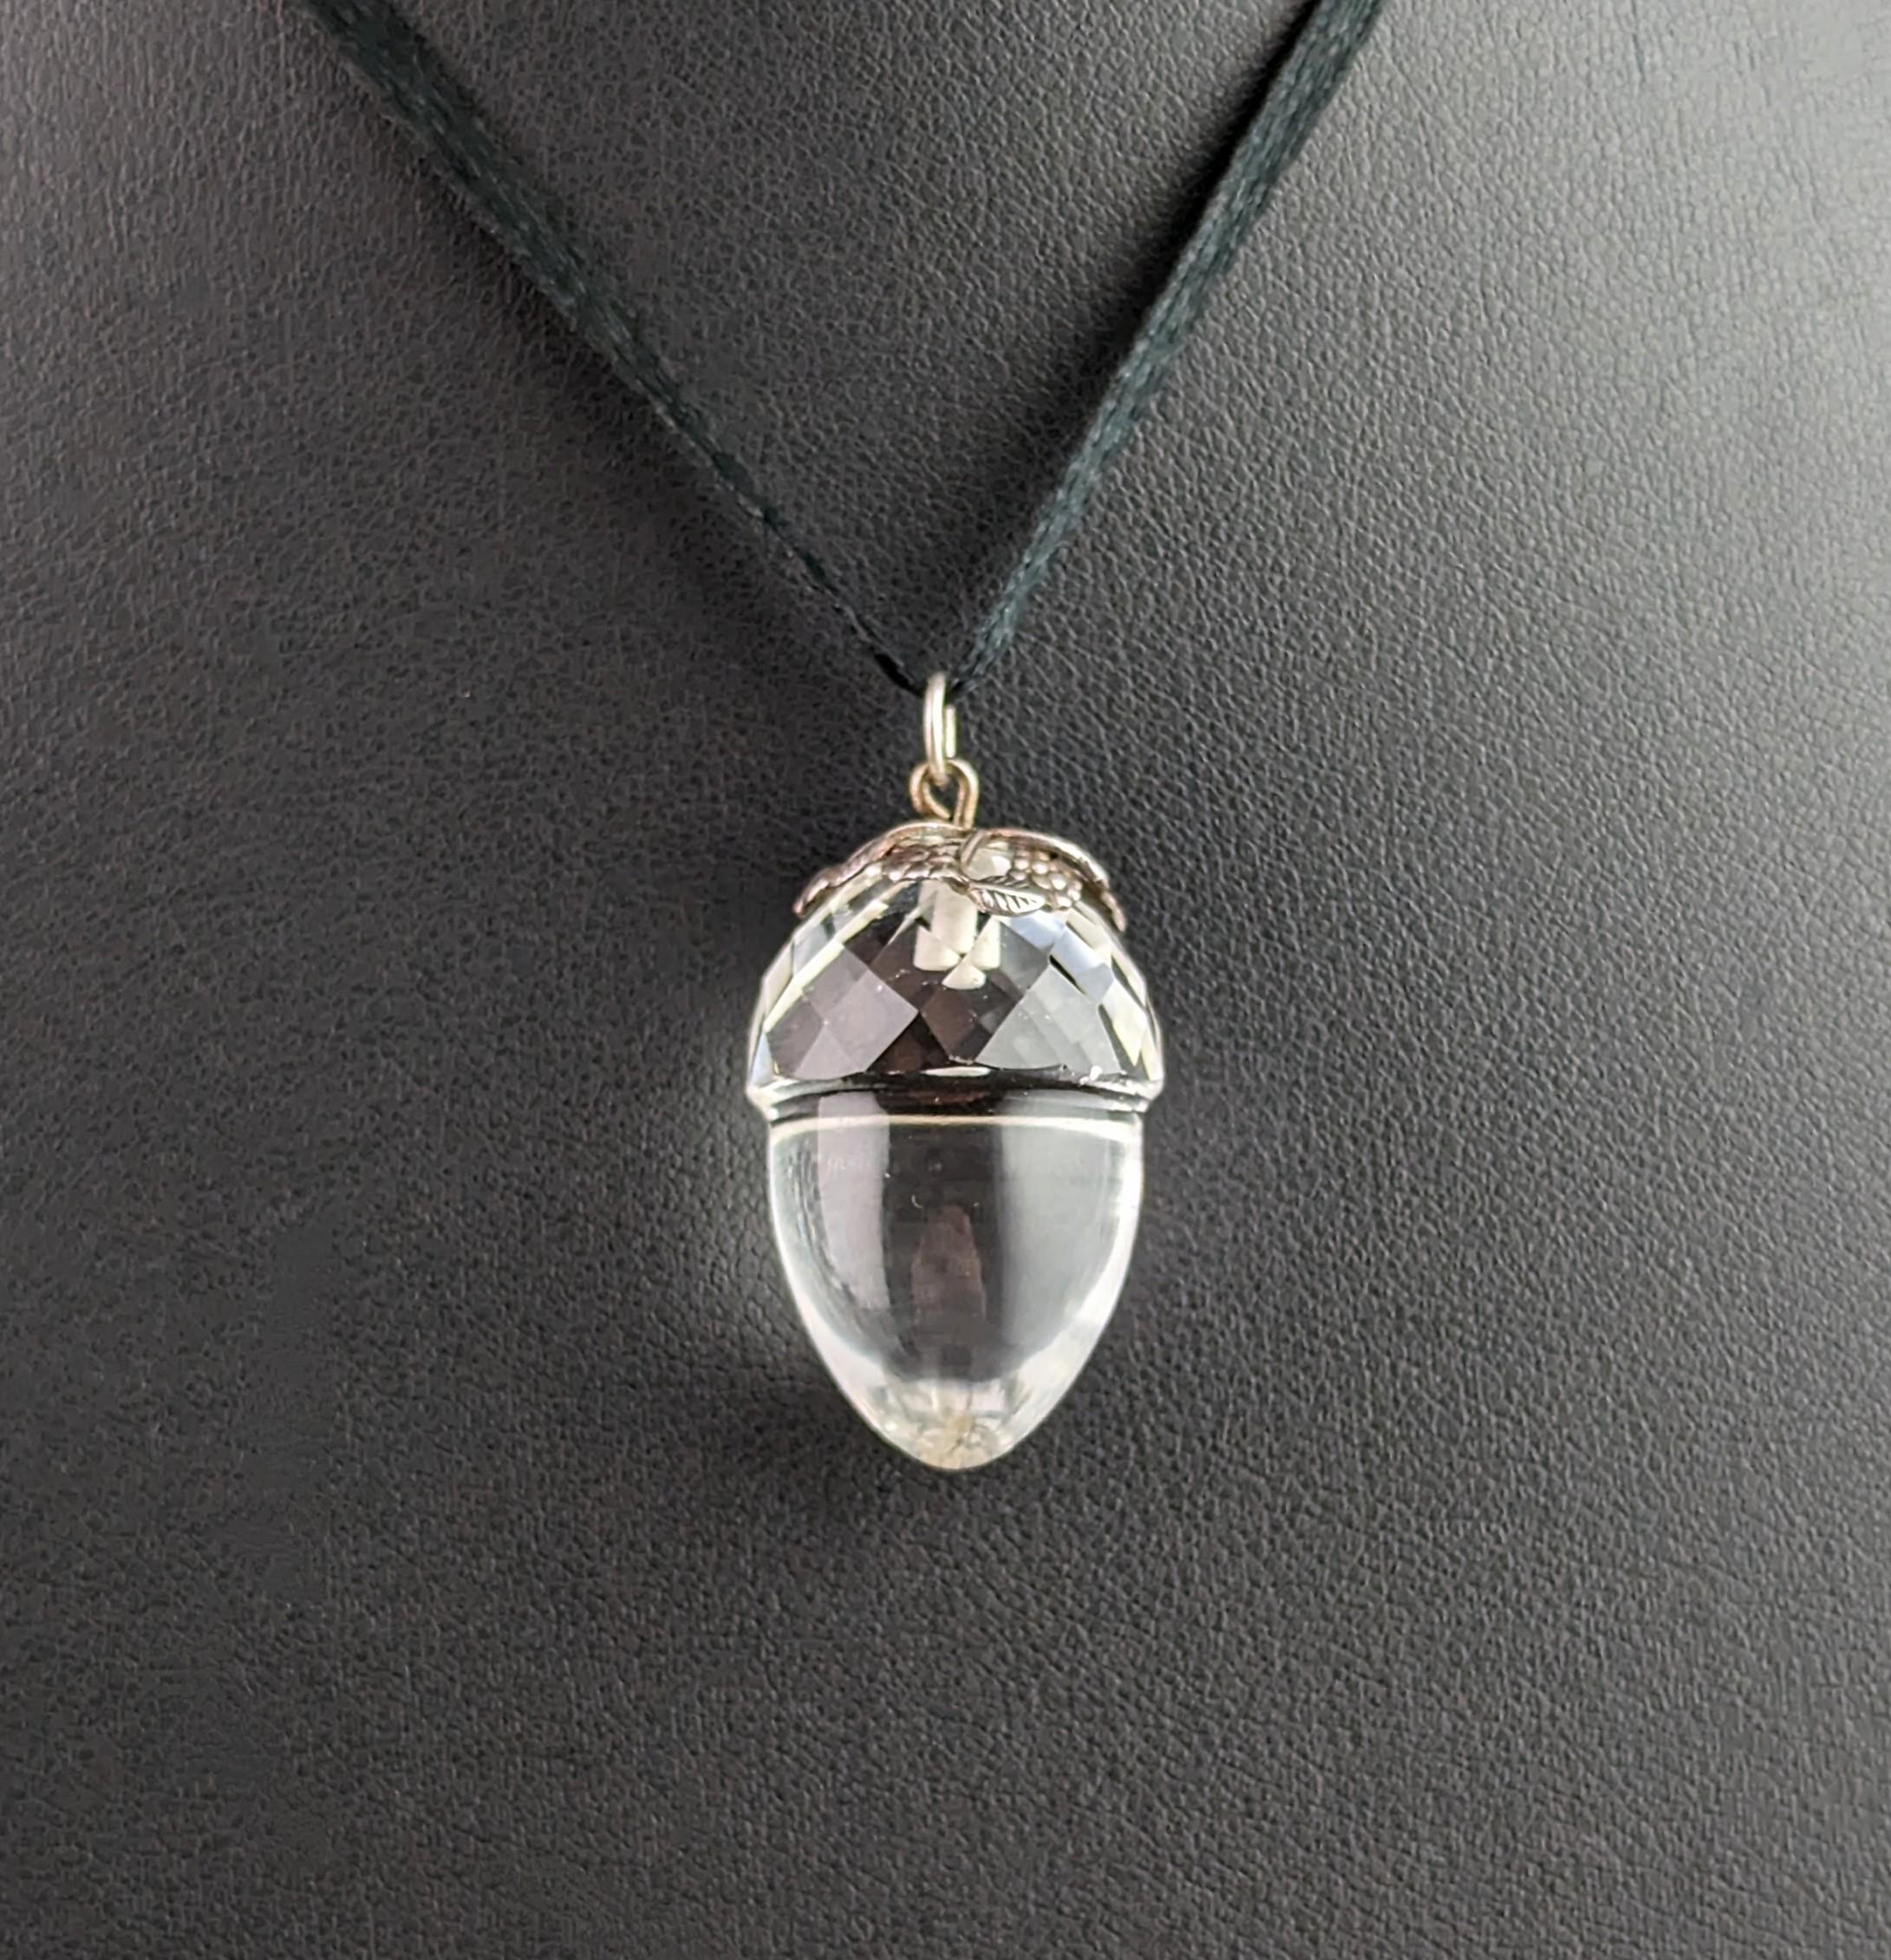 You can't help but be enamoured by this wonderful antique Rock crystal acorn pendant.

One of the most charming pieces I have ever seen with the amazing and magical carved rock crystal, the base of the acorn a smooth polished finish much like a